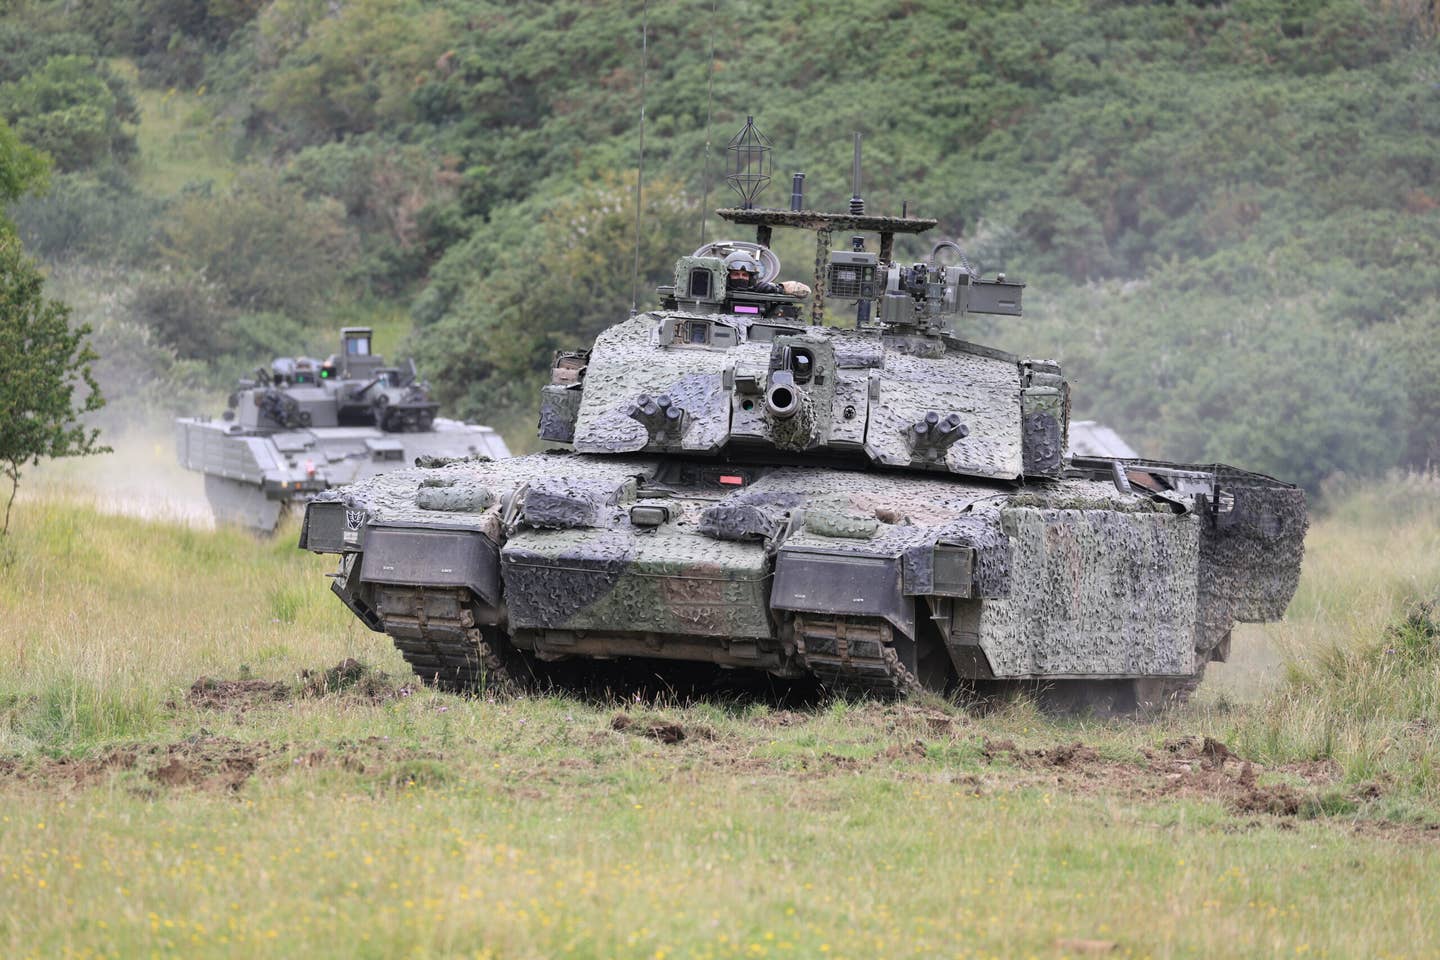 A Challenger 2 main battle tank, equipped for experimental work, and known as Challenger Megatron, is demonstrated at Lulworth Range. <em>Crown Copyright</em>